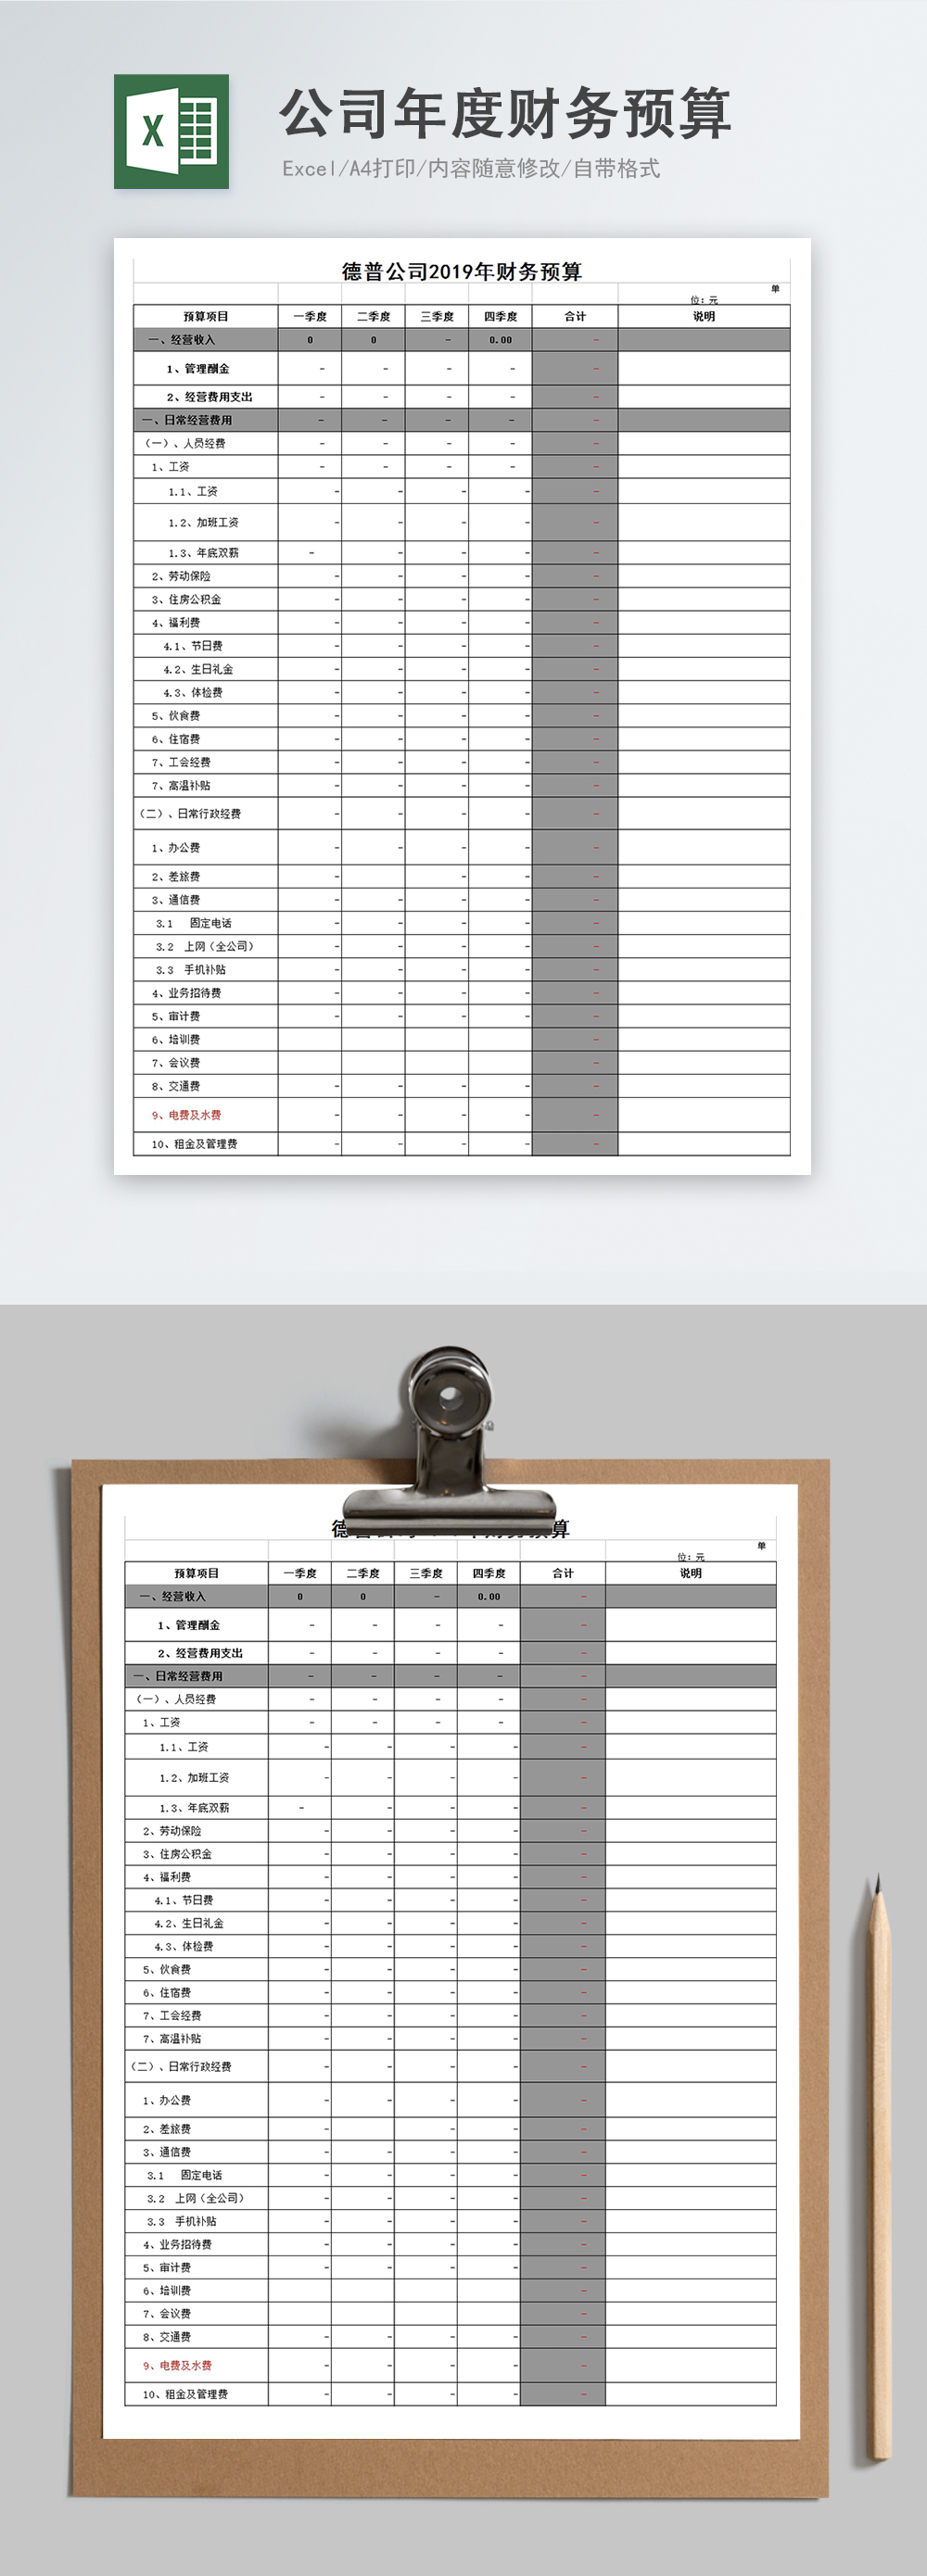 Excel Annual Budget Template from img.lovepik.com